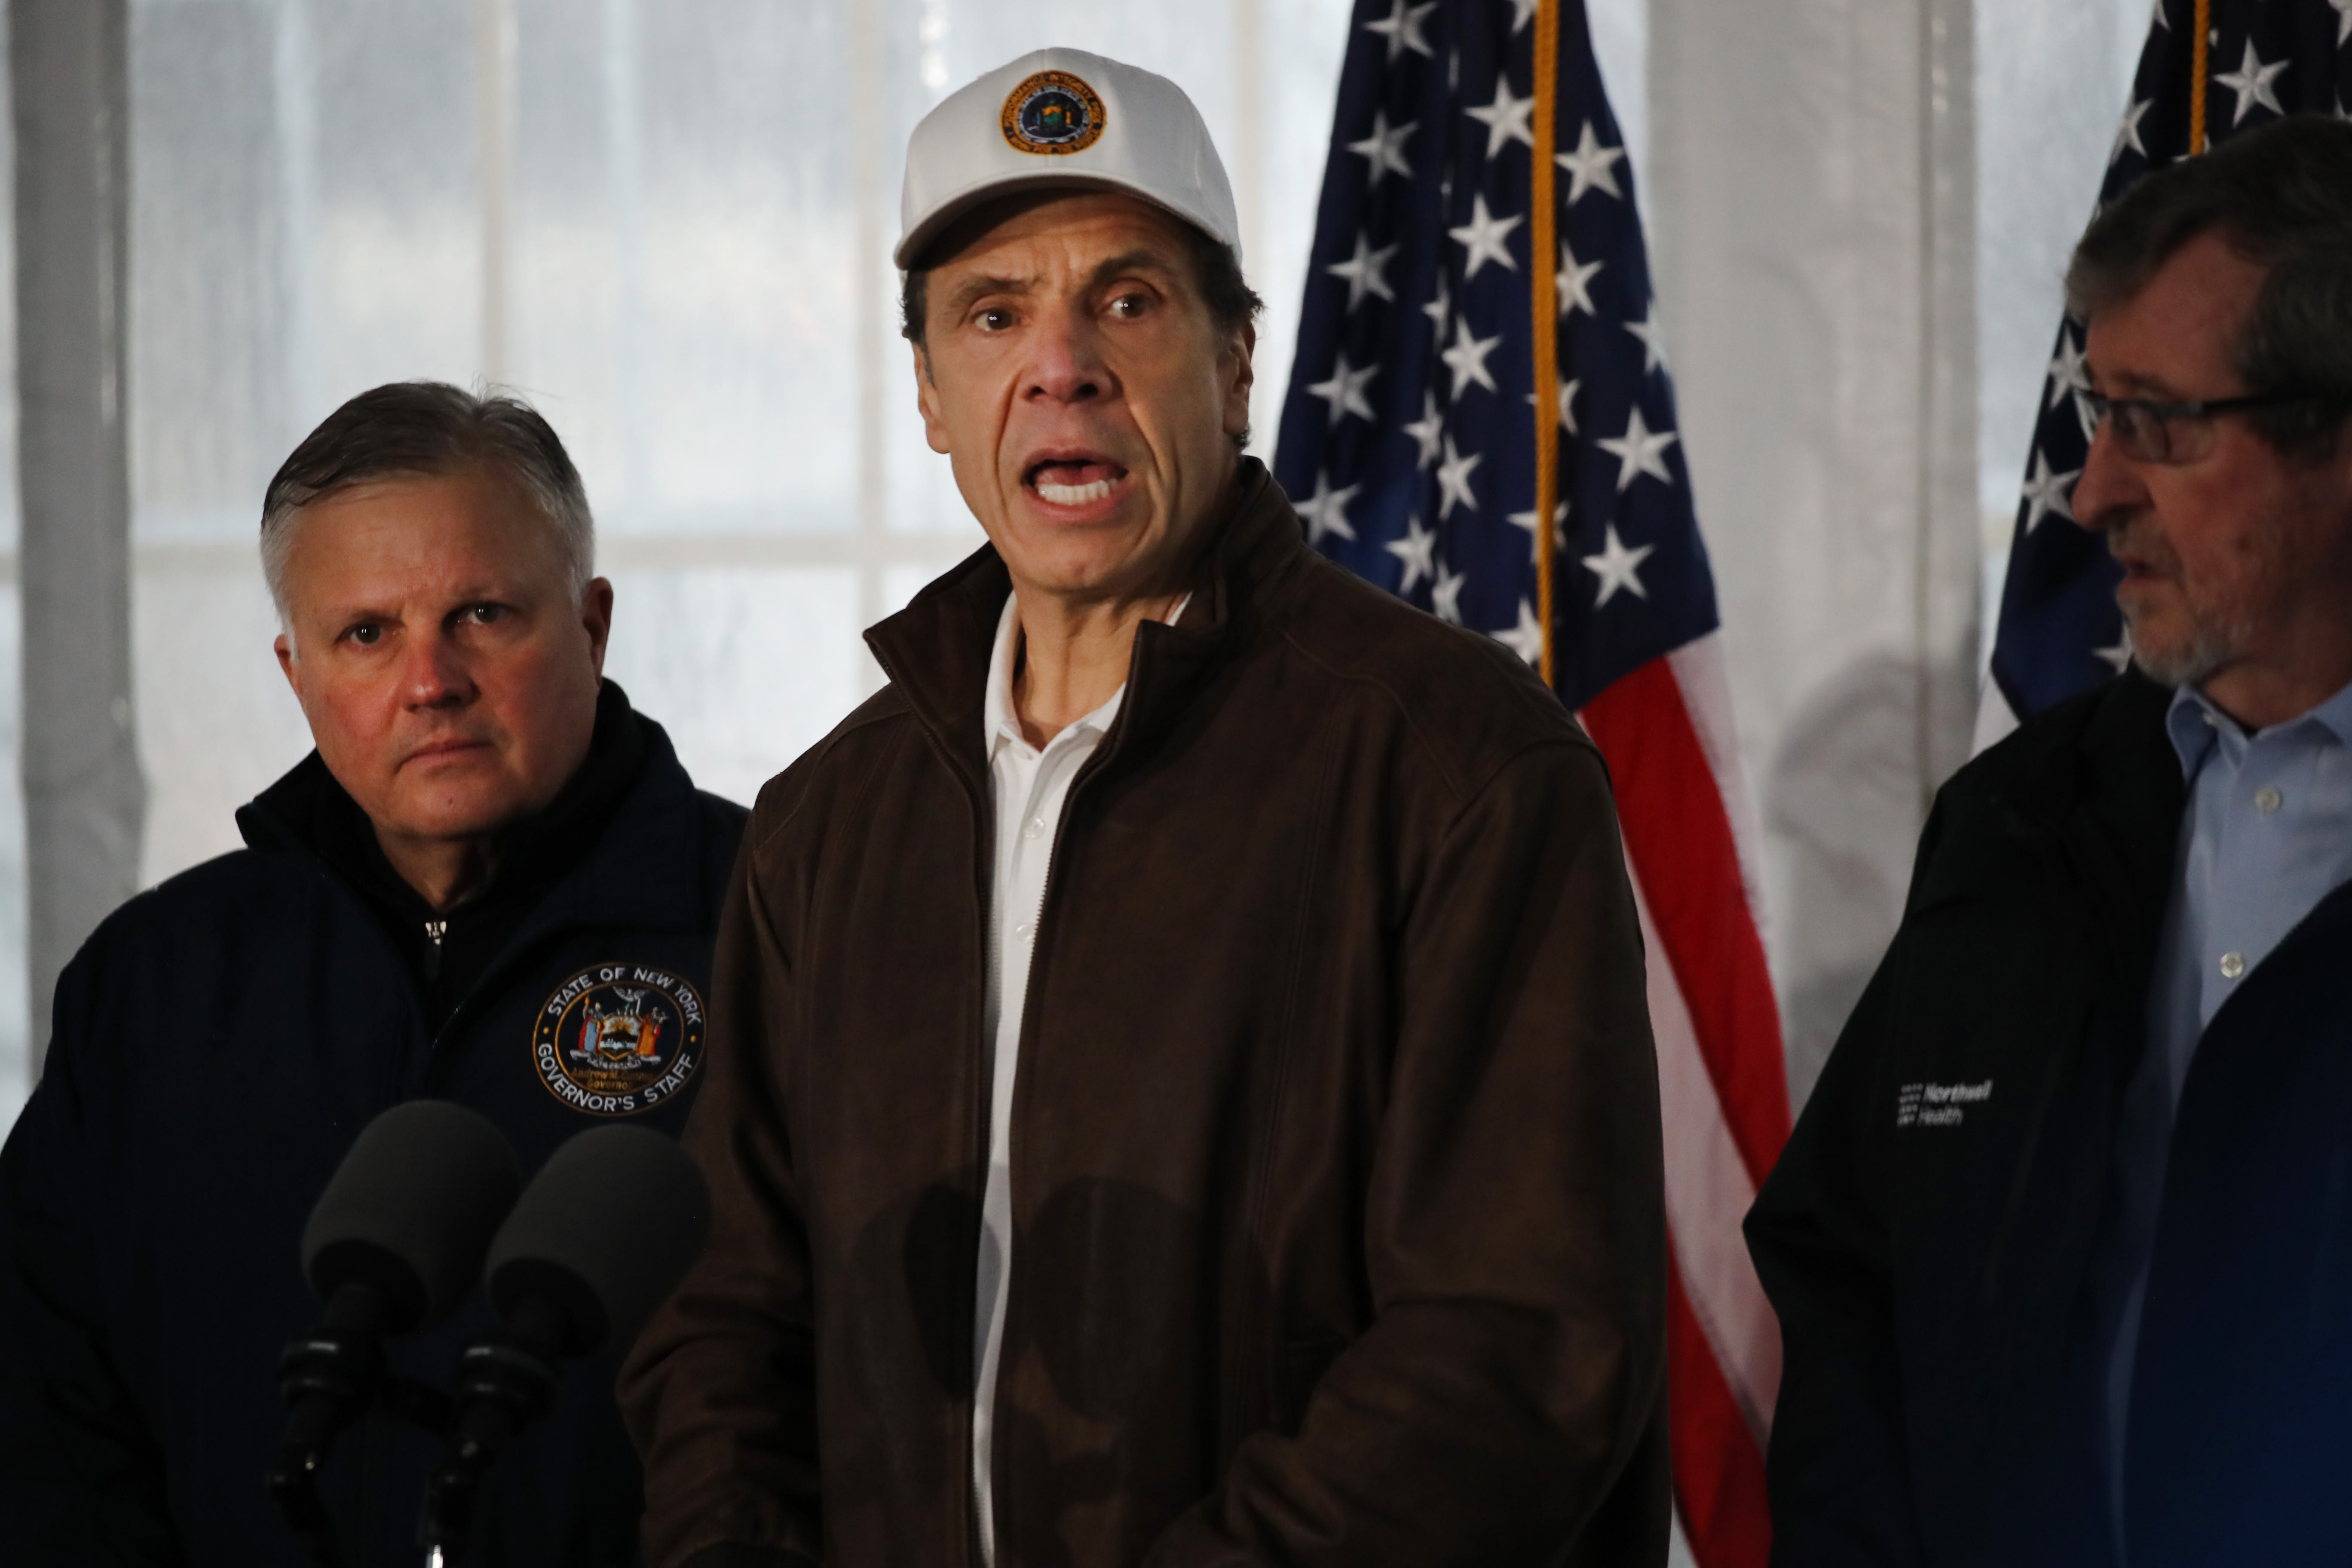 New York state likely has 'tens of thousands' of coronavirus cases, Gov. Cuomo says